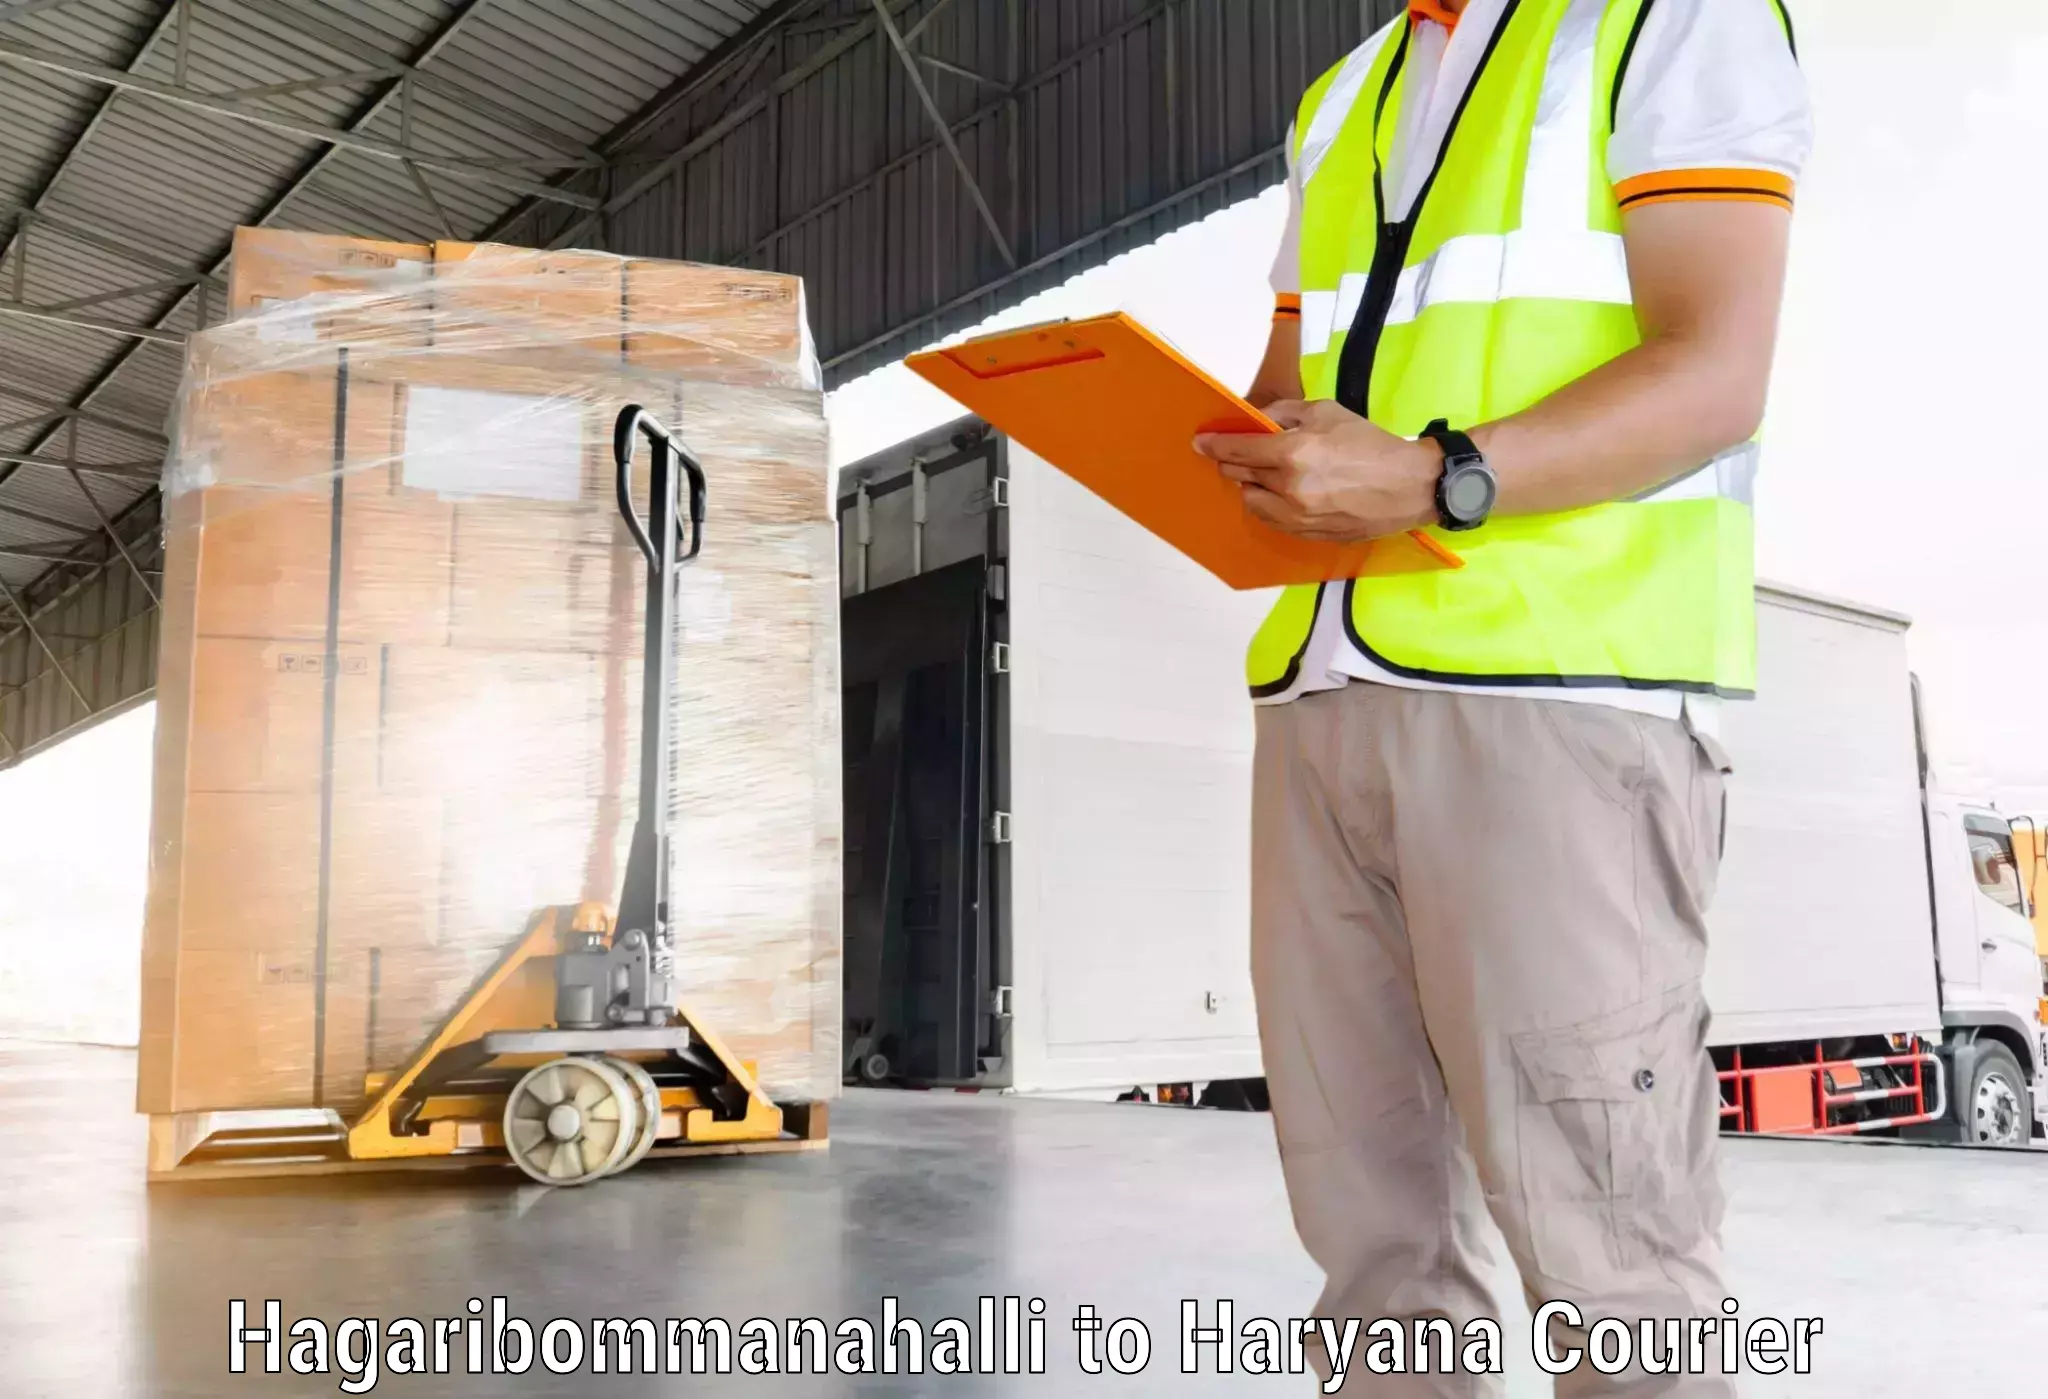 Easy access courier services Hagaribommanahalli to Gurgaon